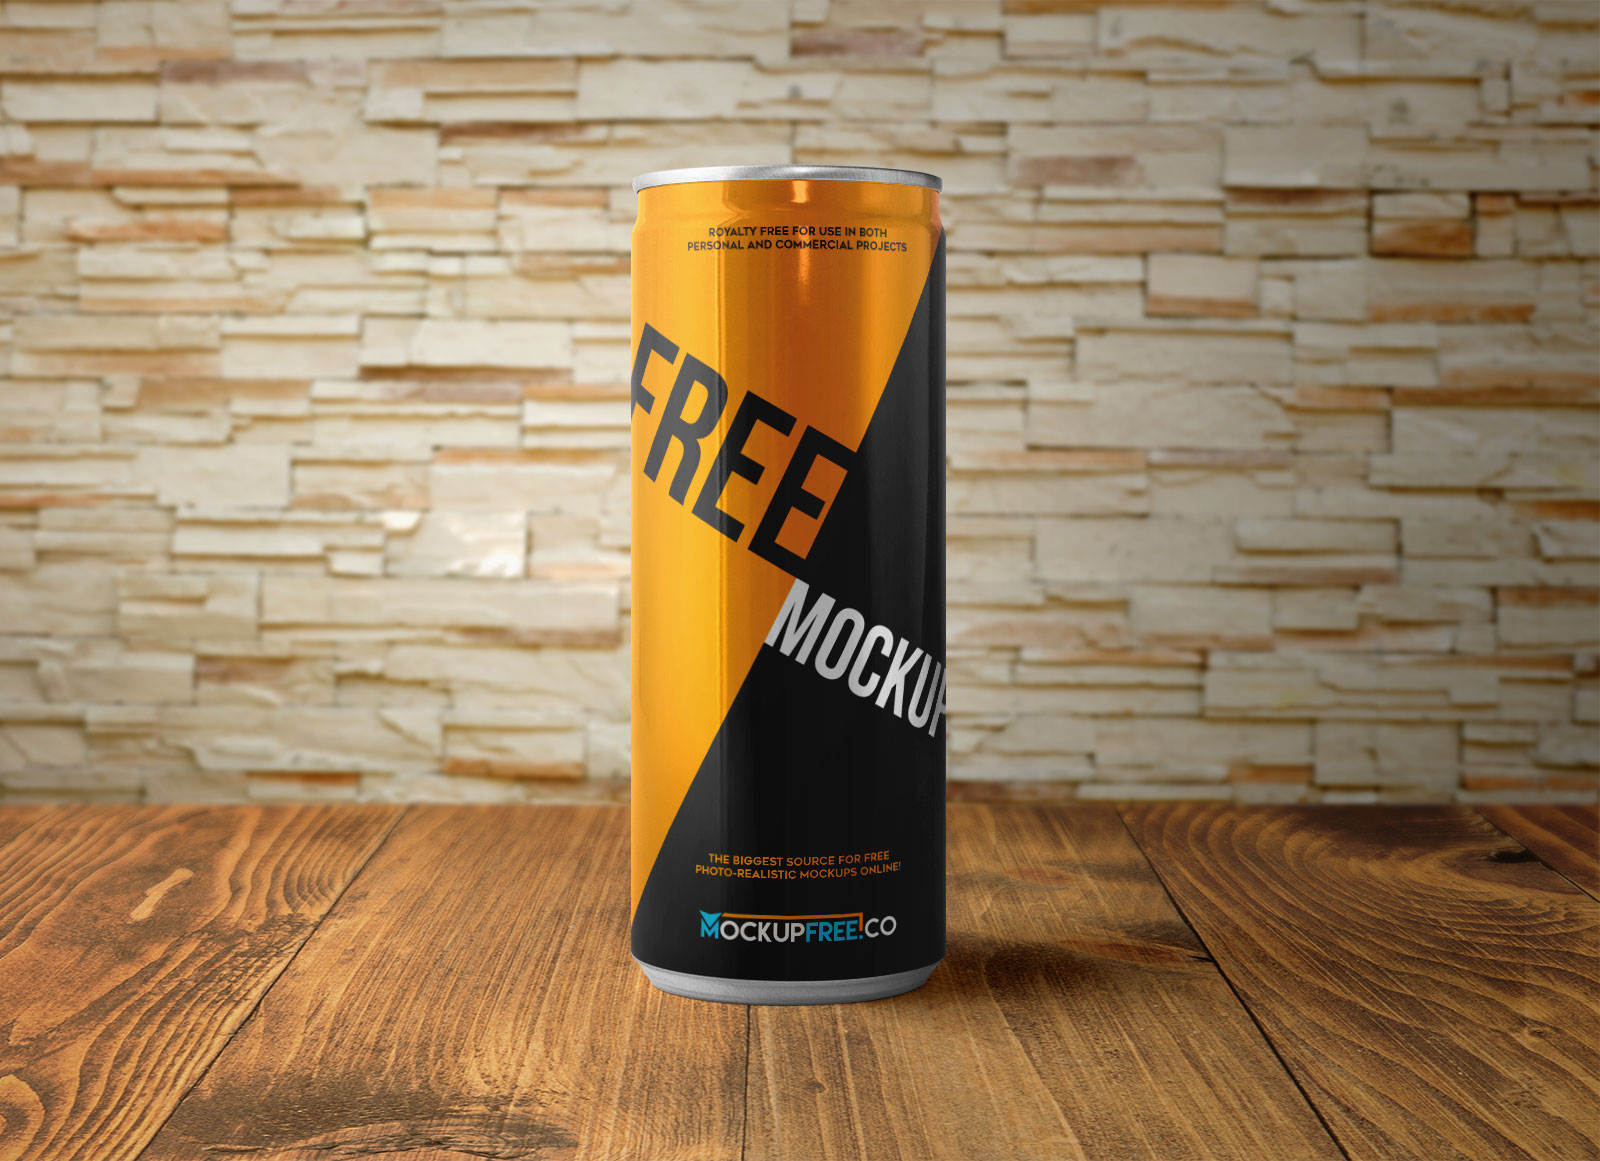 Free tin can mockups for ps information